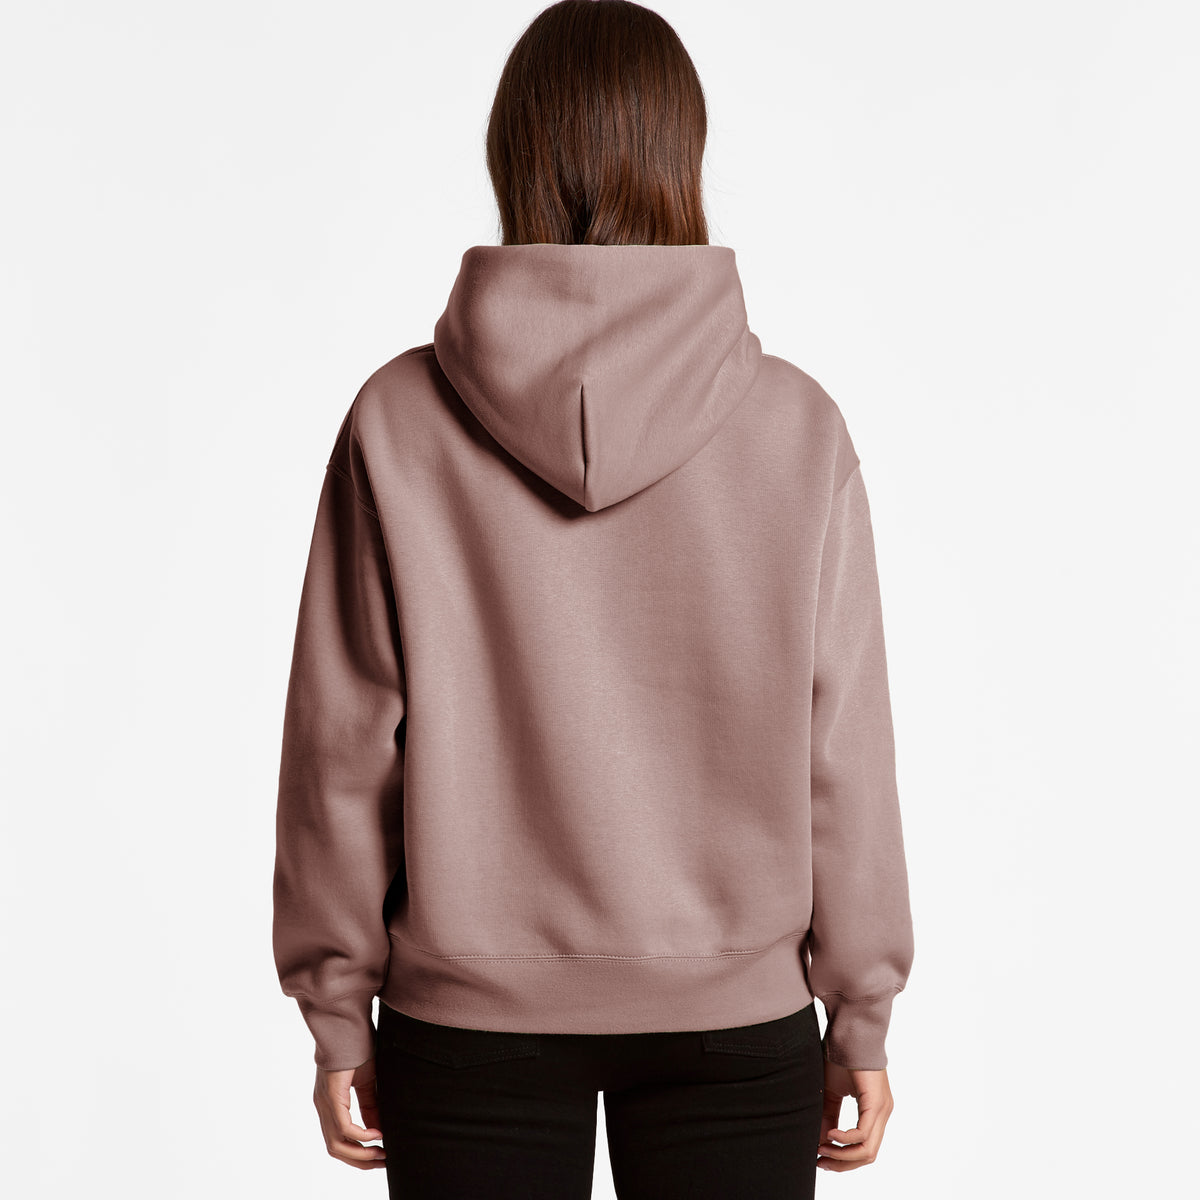 Saturnia pavonia - Small Emperor Moth - Women&#39;s Heavyweight Relaxed Hoodie